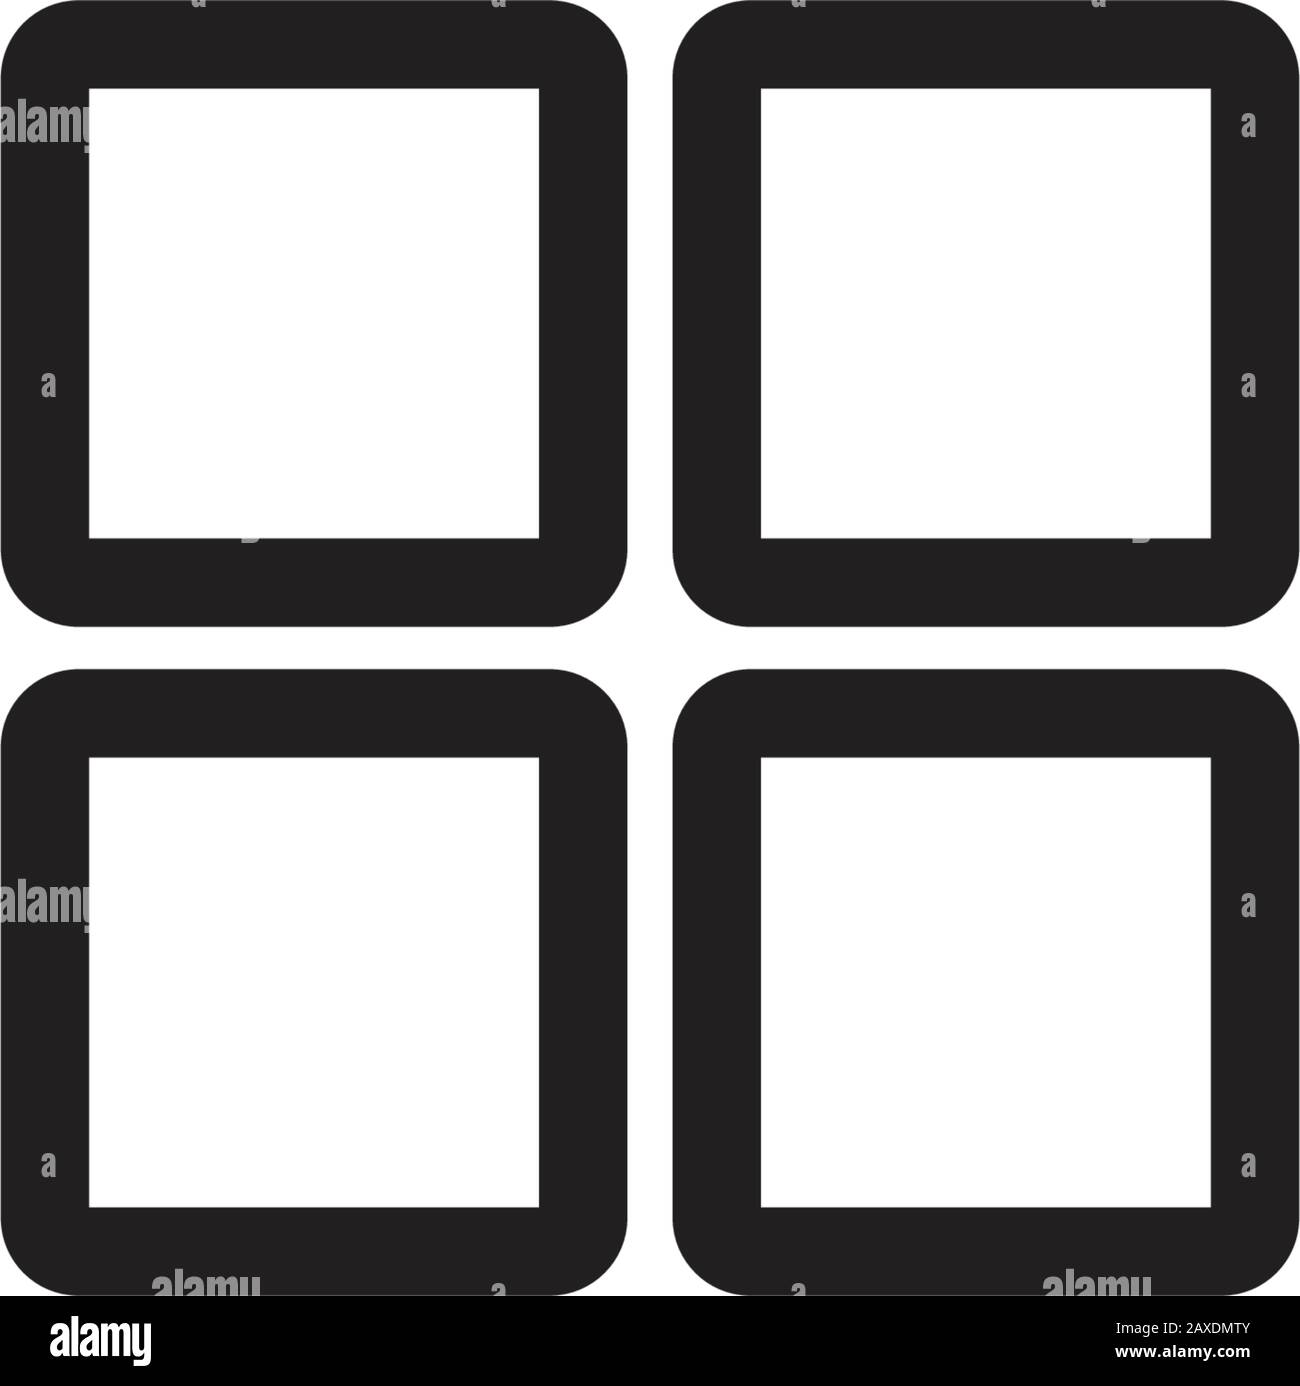 Four squares logo design grid can be used Vector Image